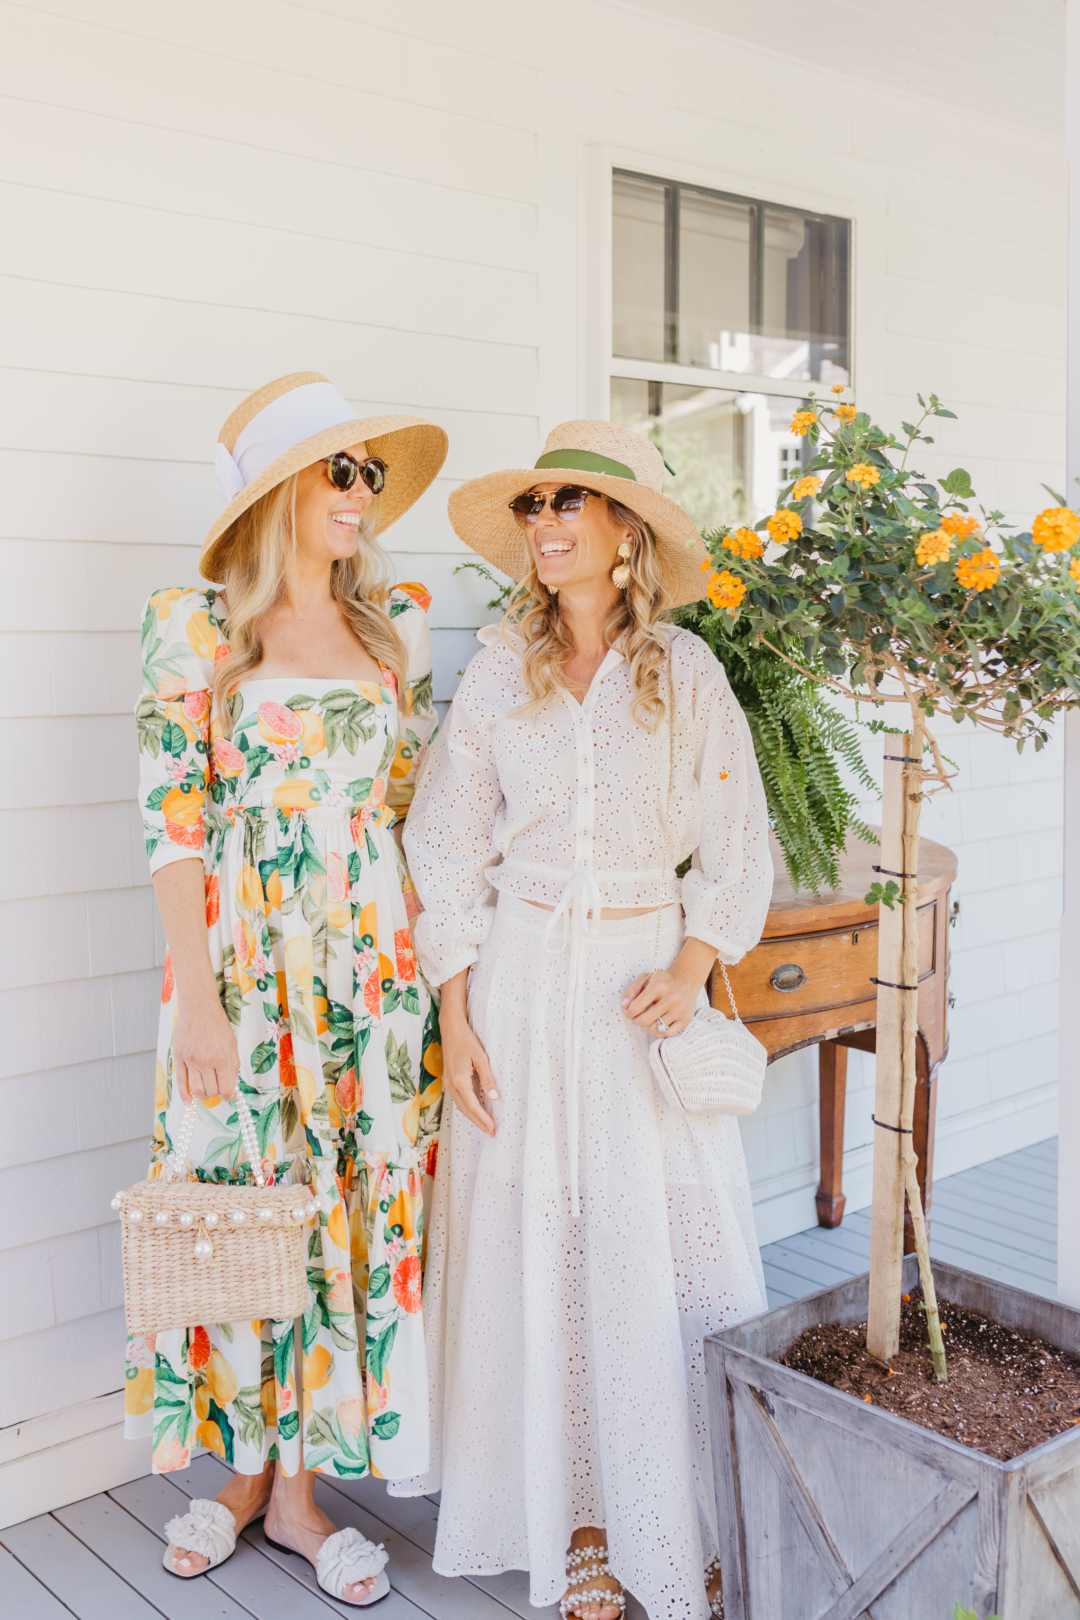 Travel: Life House on Nantucket with Palm Beach Lately